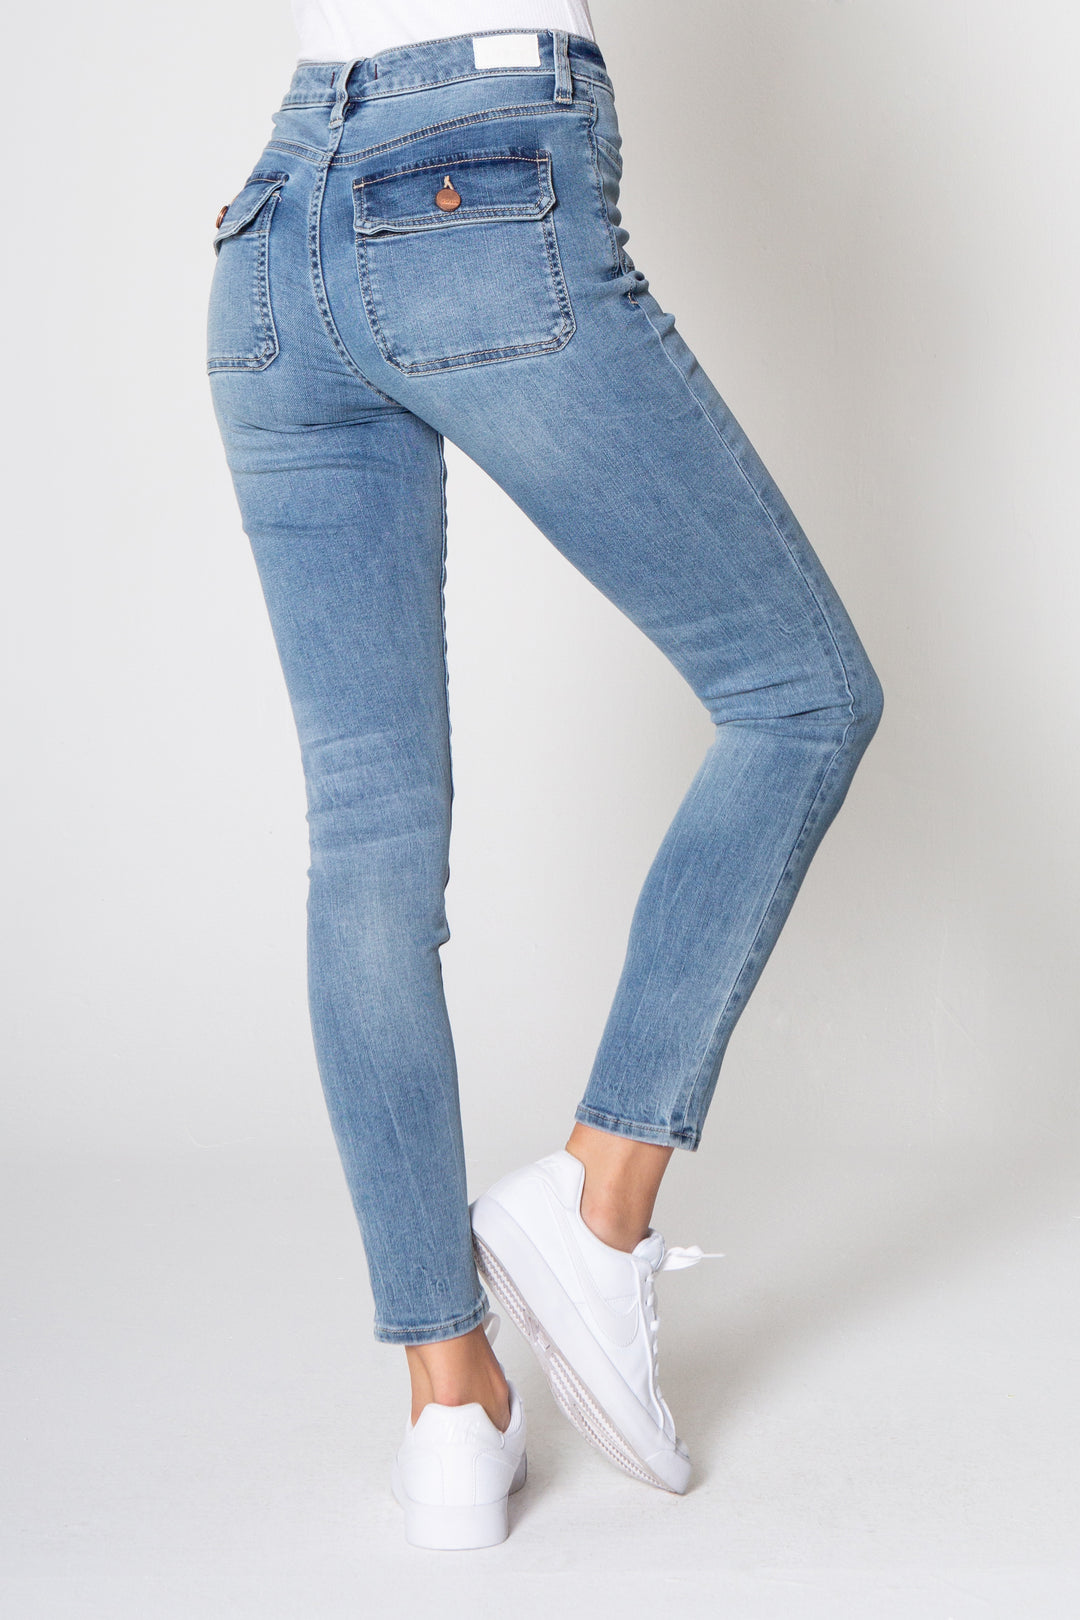 image of a female model wearing a 10 1/2" SUPER HIGH RISE OLIVIA IN ALANDALE JEANS